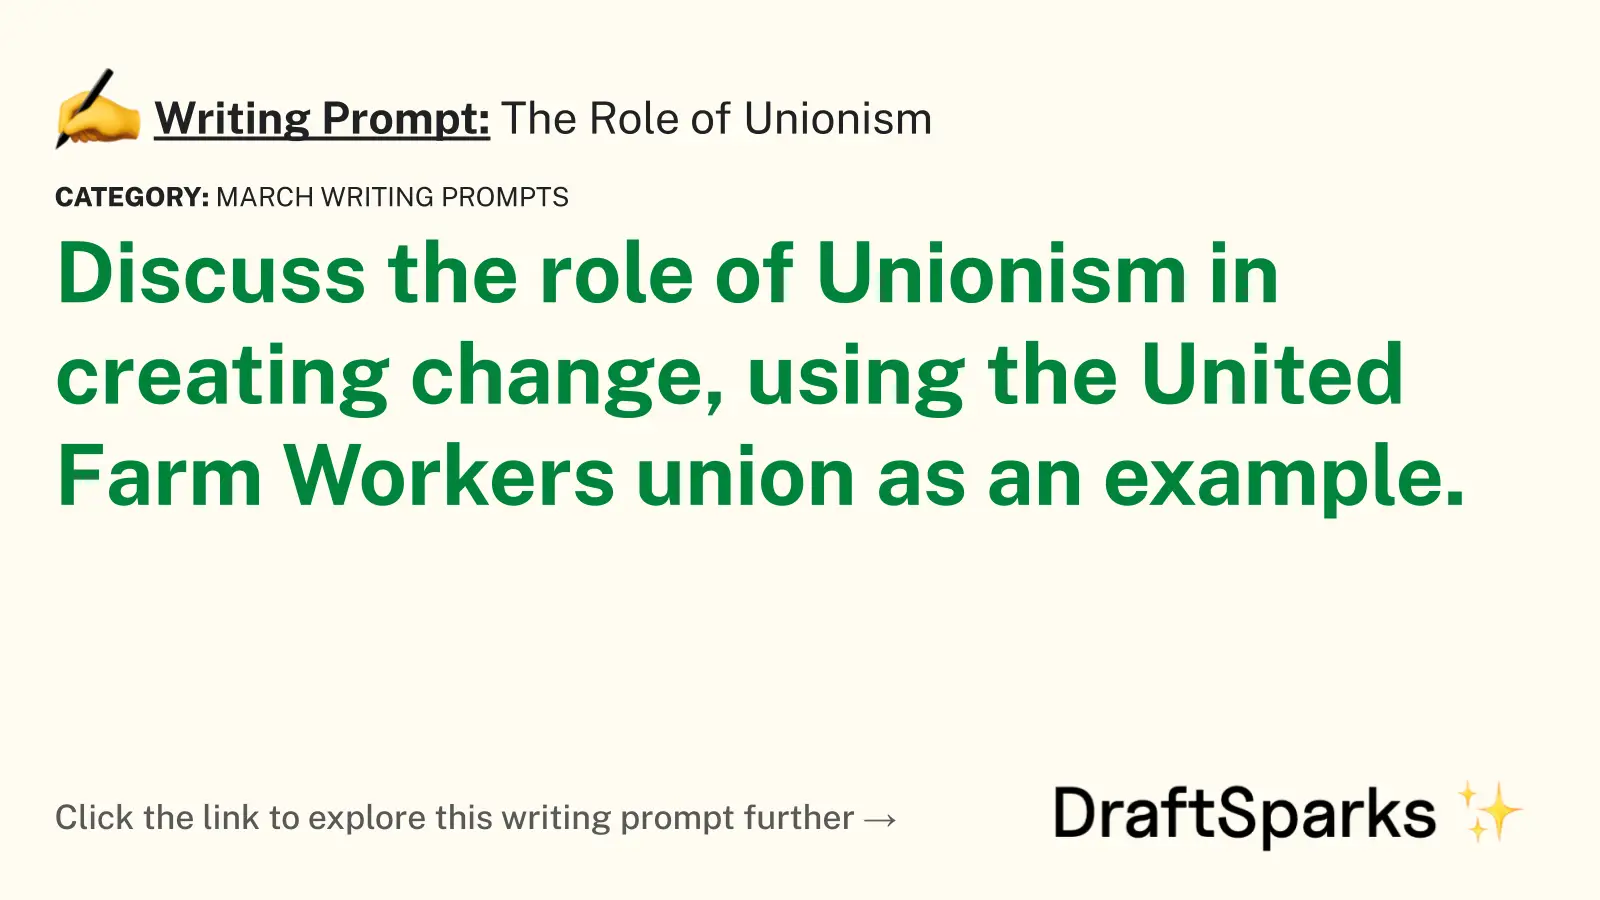 The Role of Unionism